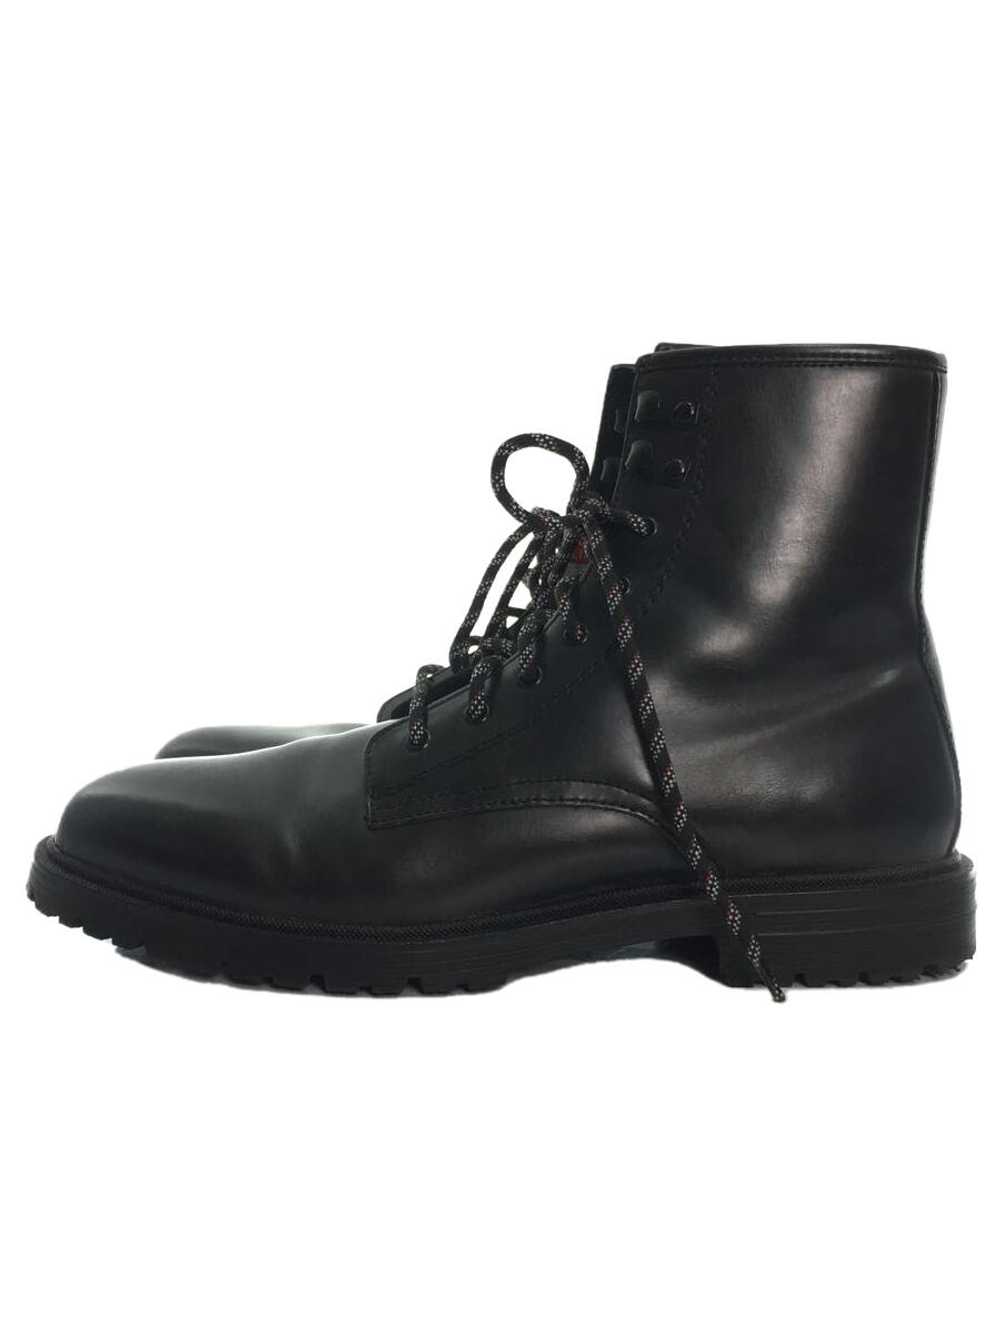 Zara Lace Up Boots/44/Blk Shoes BYU40 - image 1